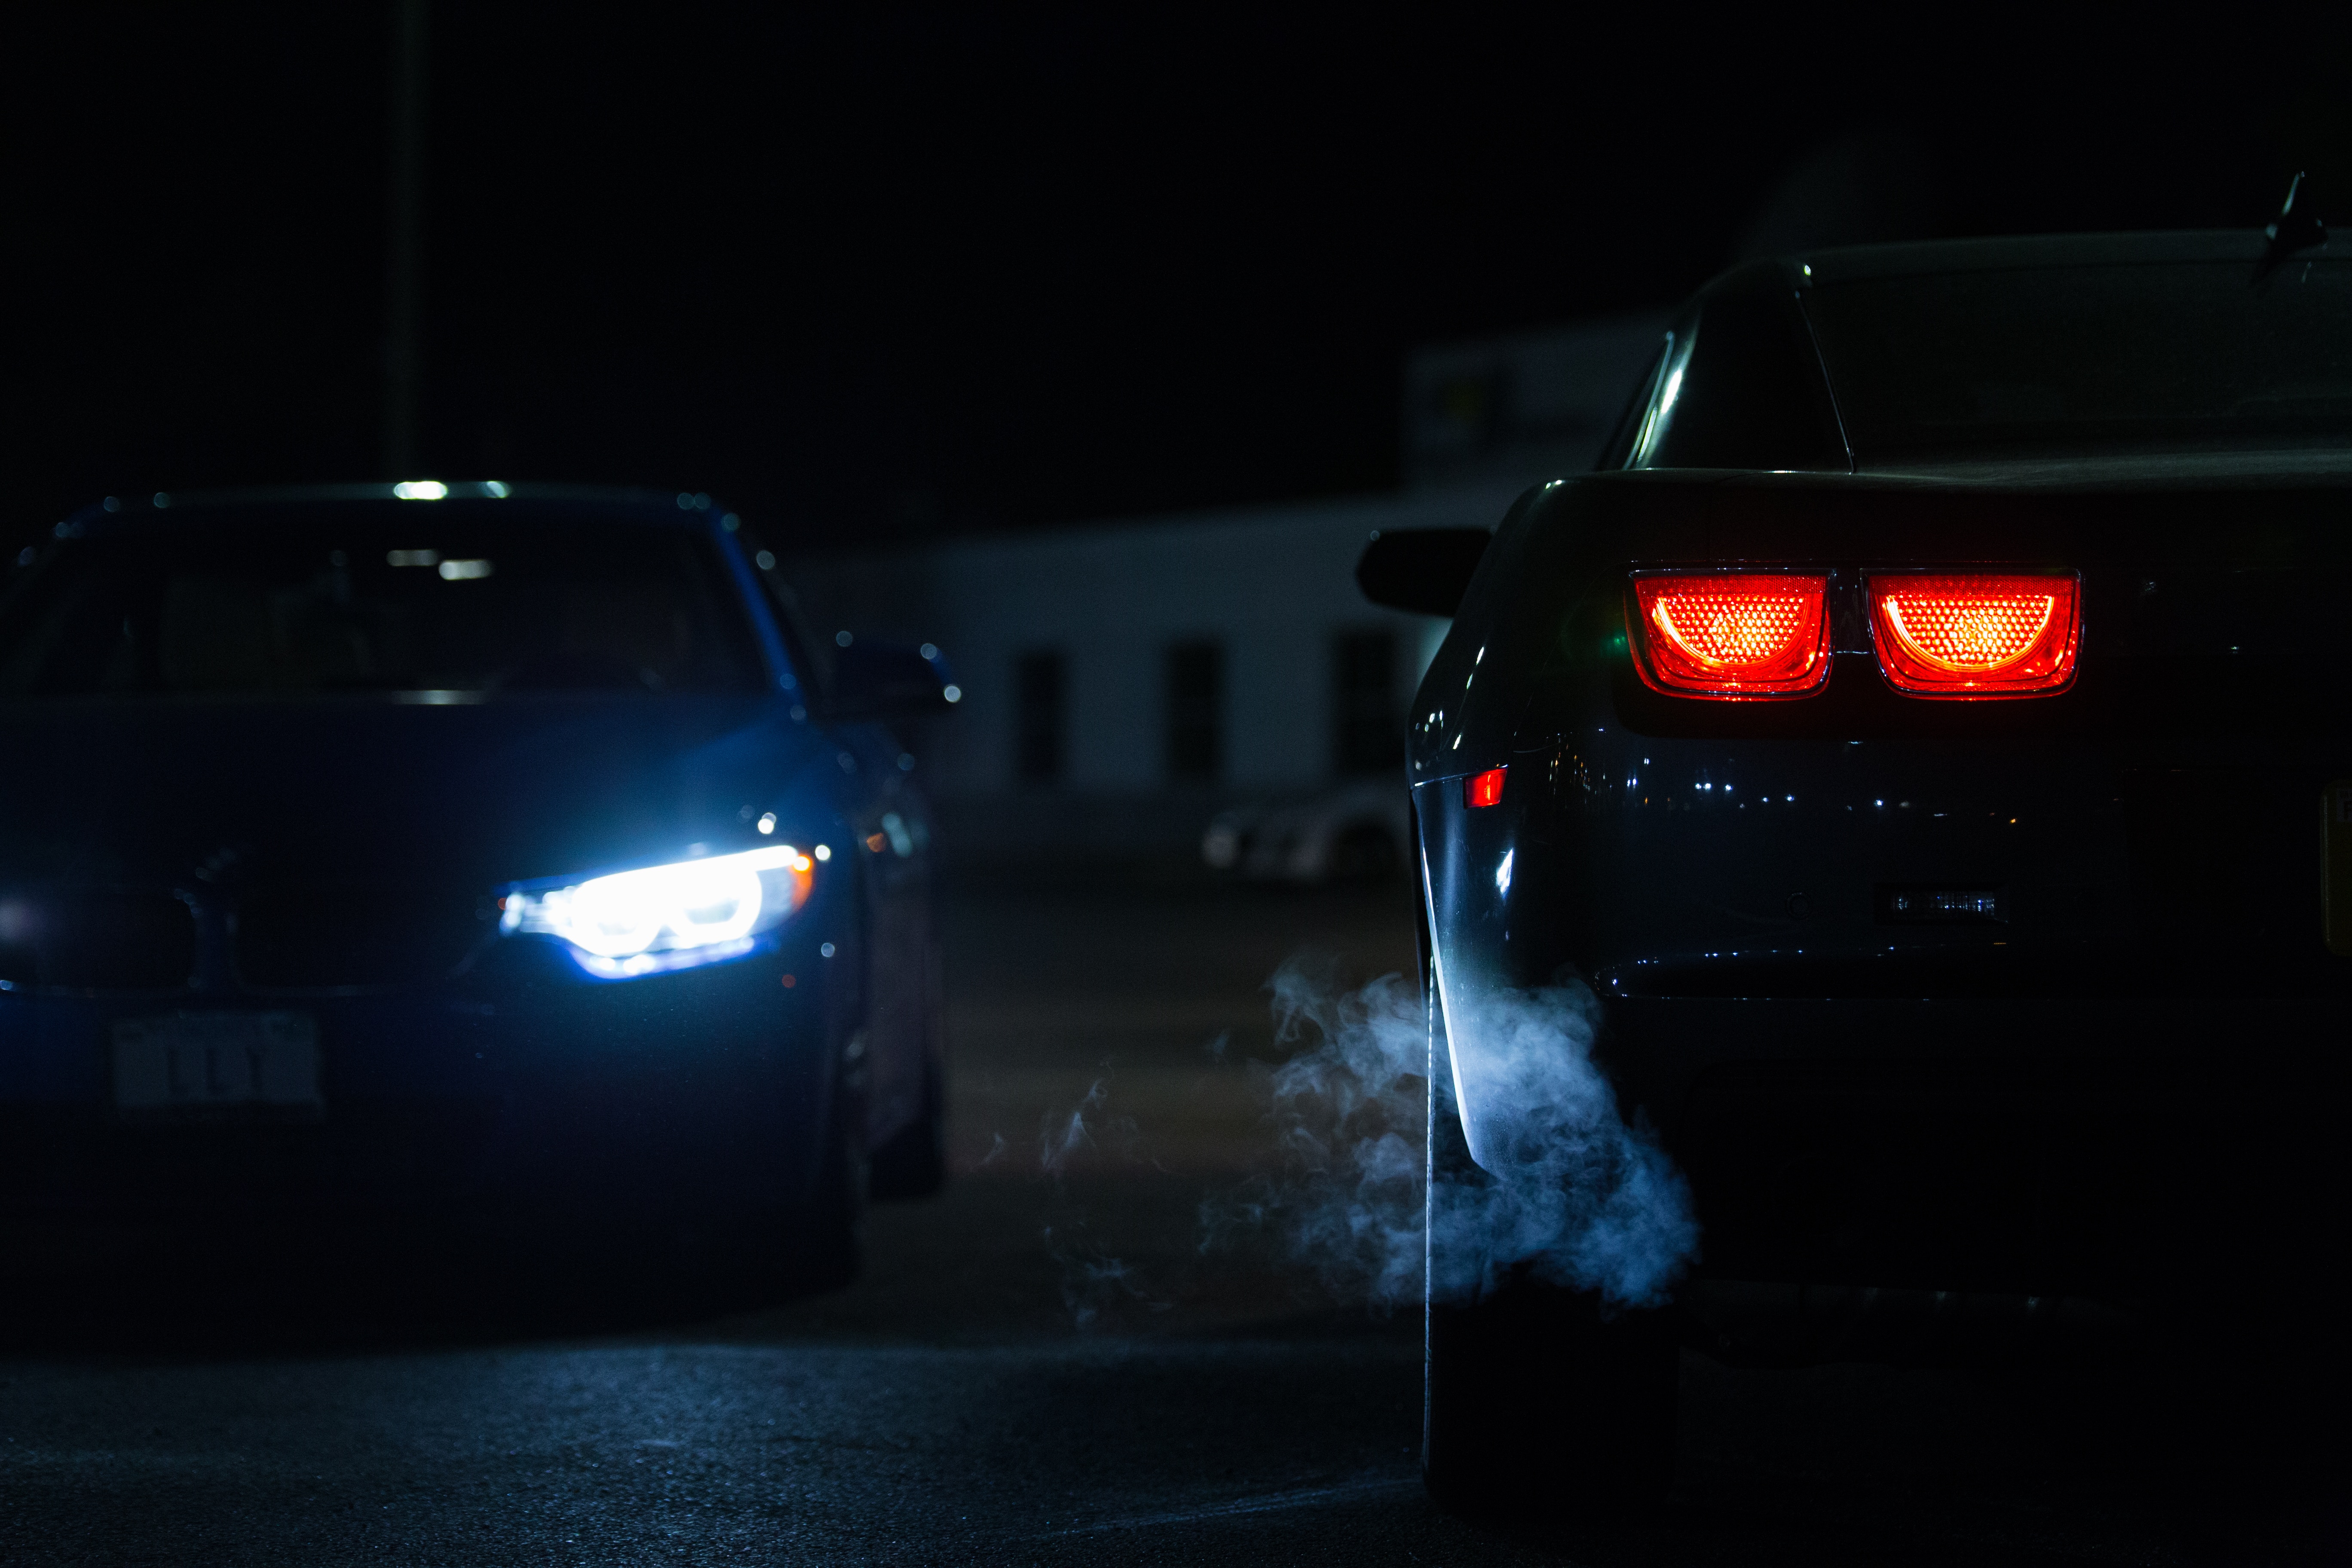 70809 download wallpaper car, night, cars, lights, headlights screensavers and pictures for free